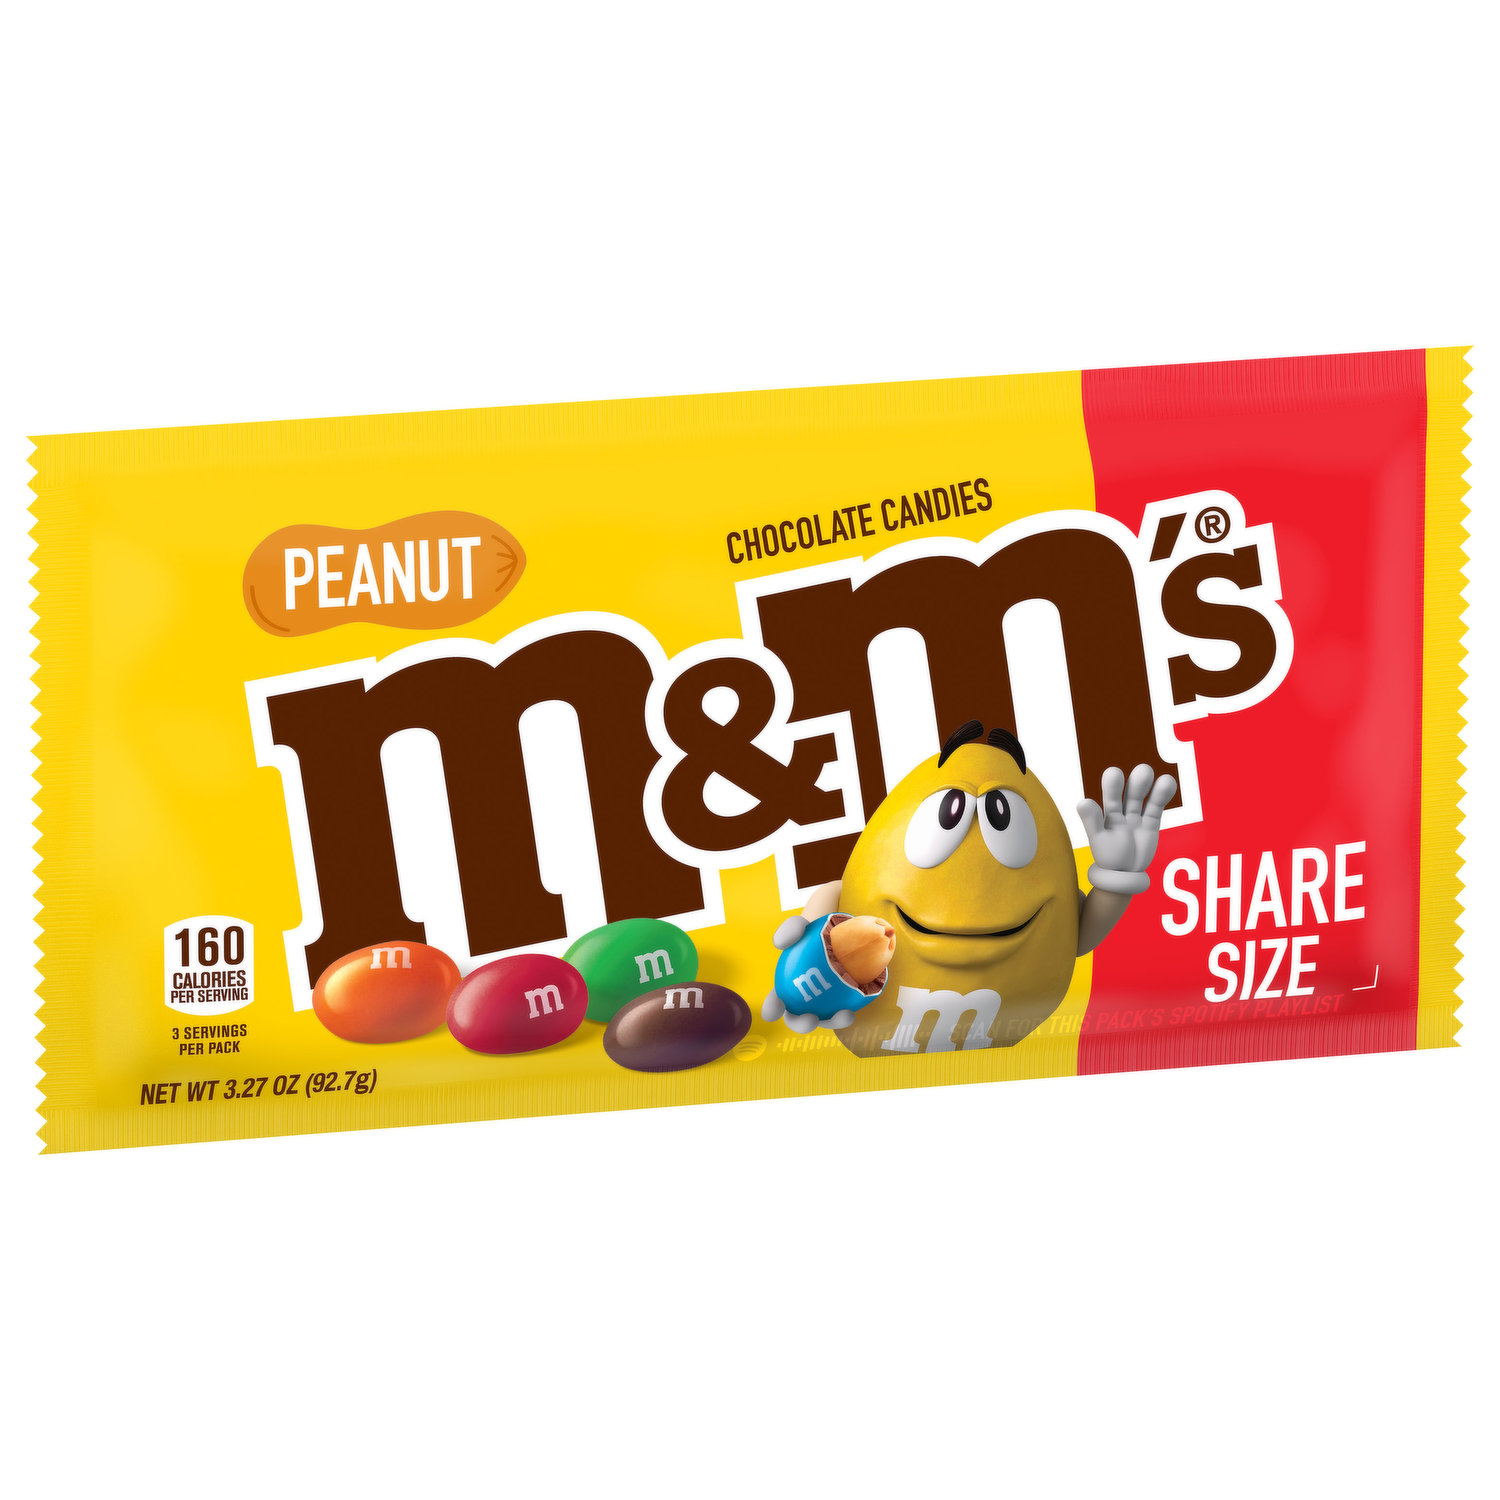 M&M'S Red, White & Blue Peanut Chocolate Candy, Sharing Size, 10.7